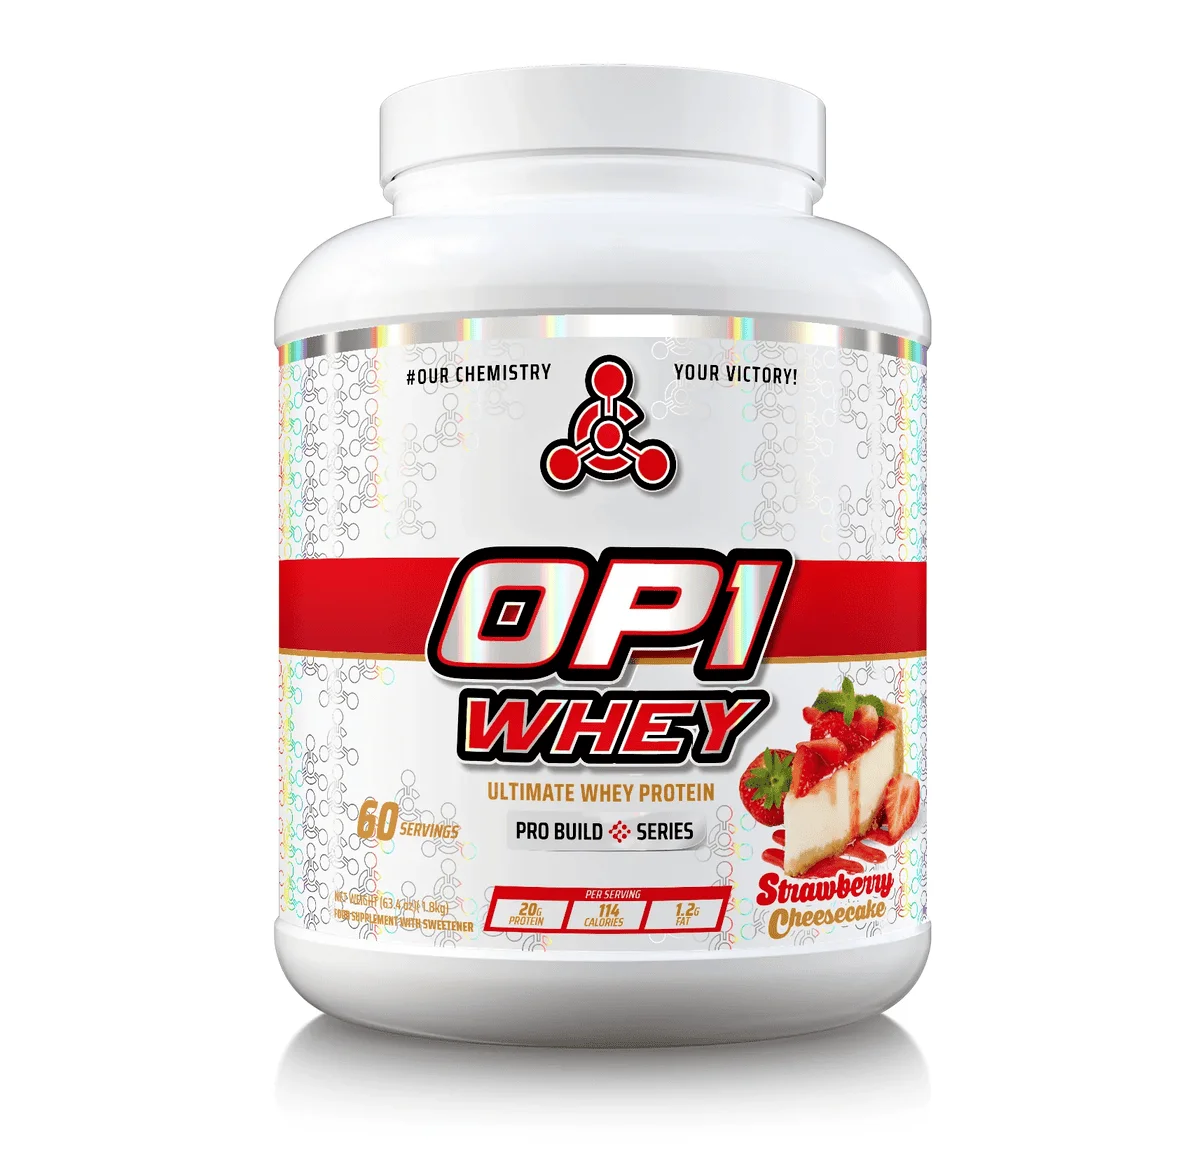 OP1 WHEY PROTEIN - 1.8KG - Strawberry Cheesecake